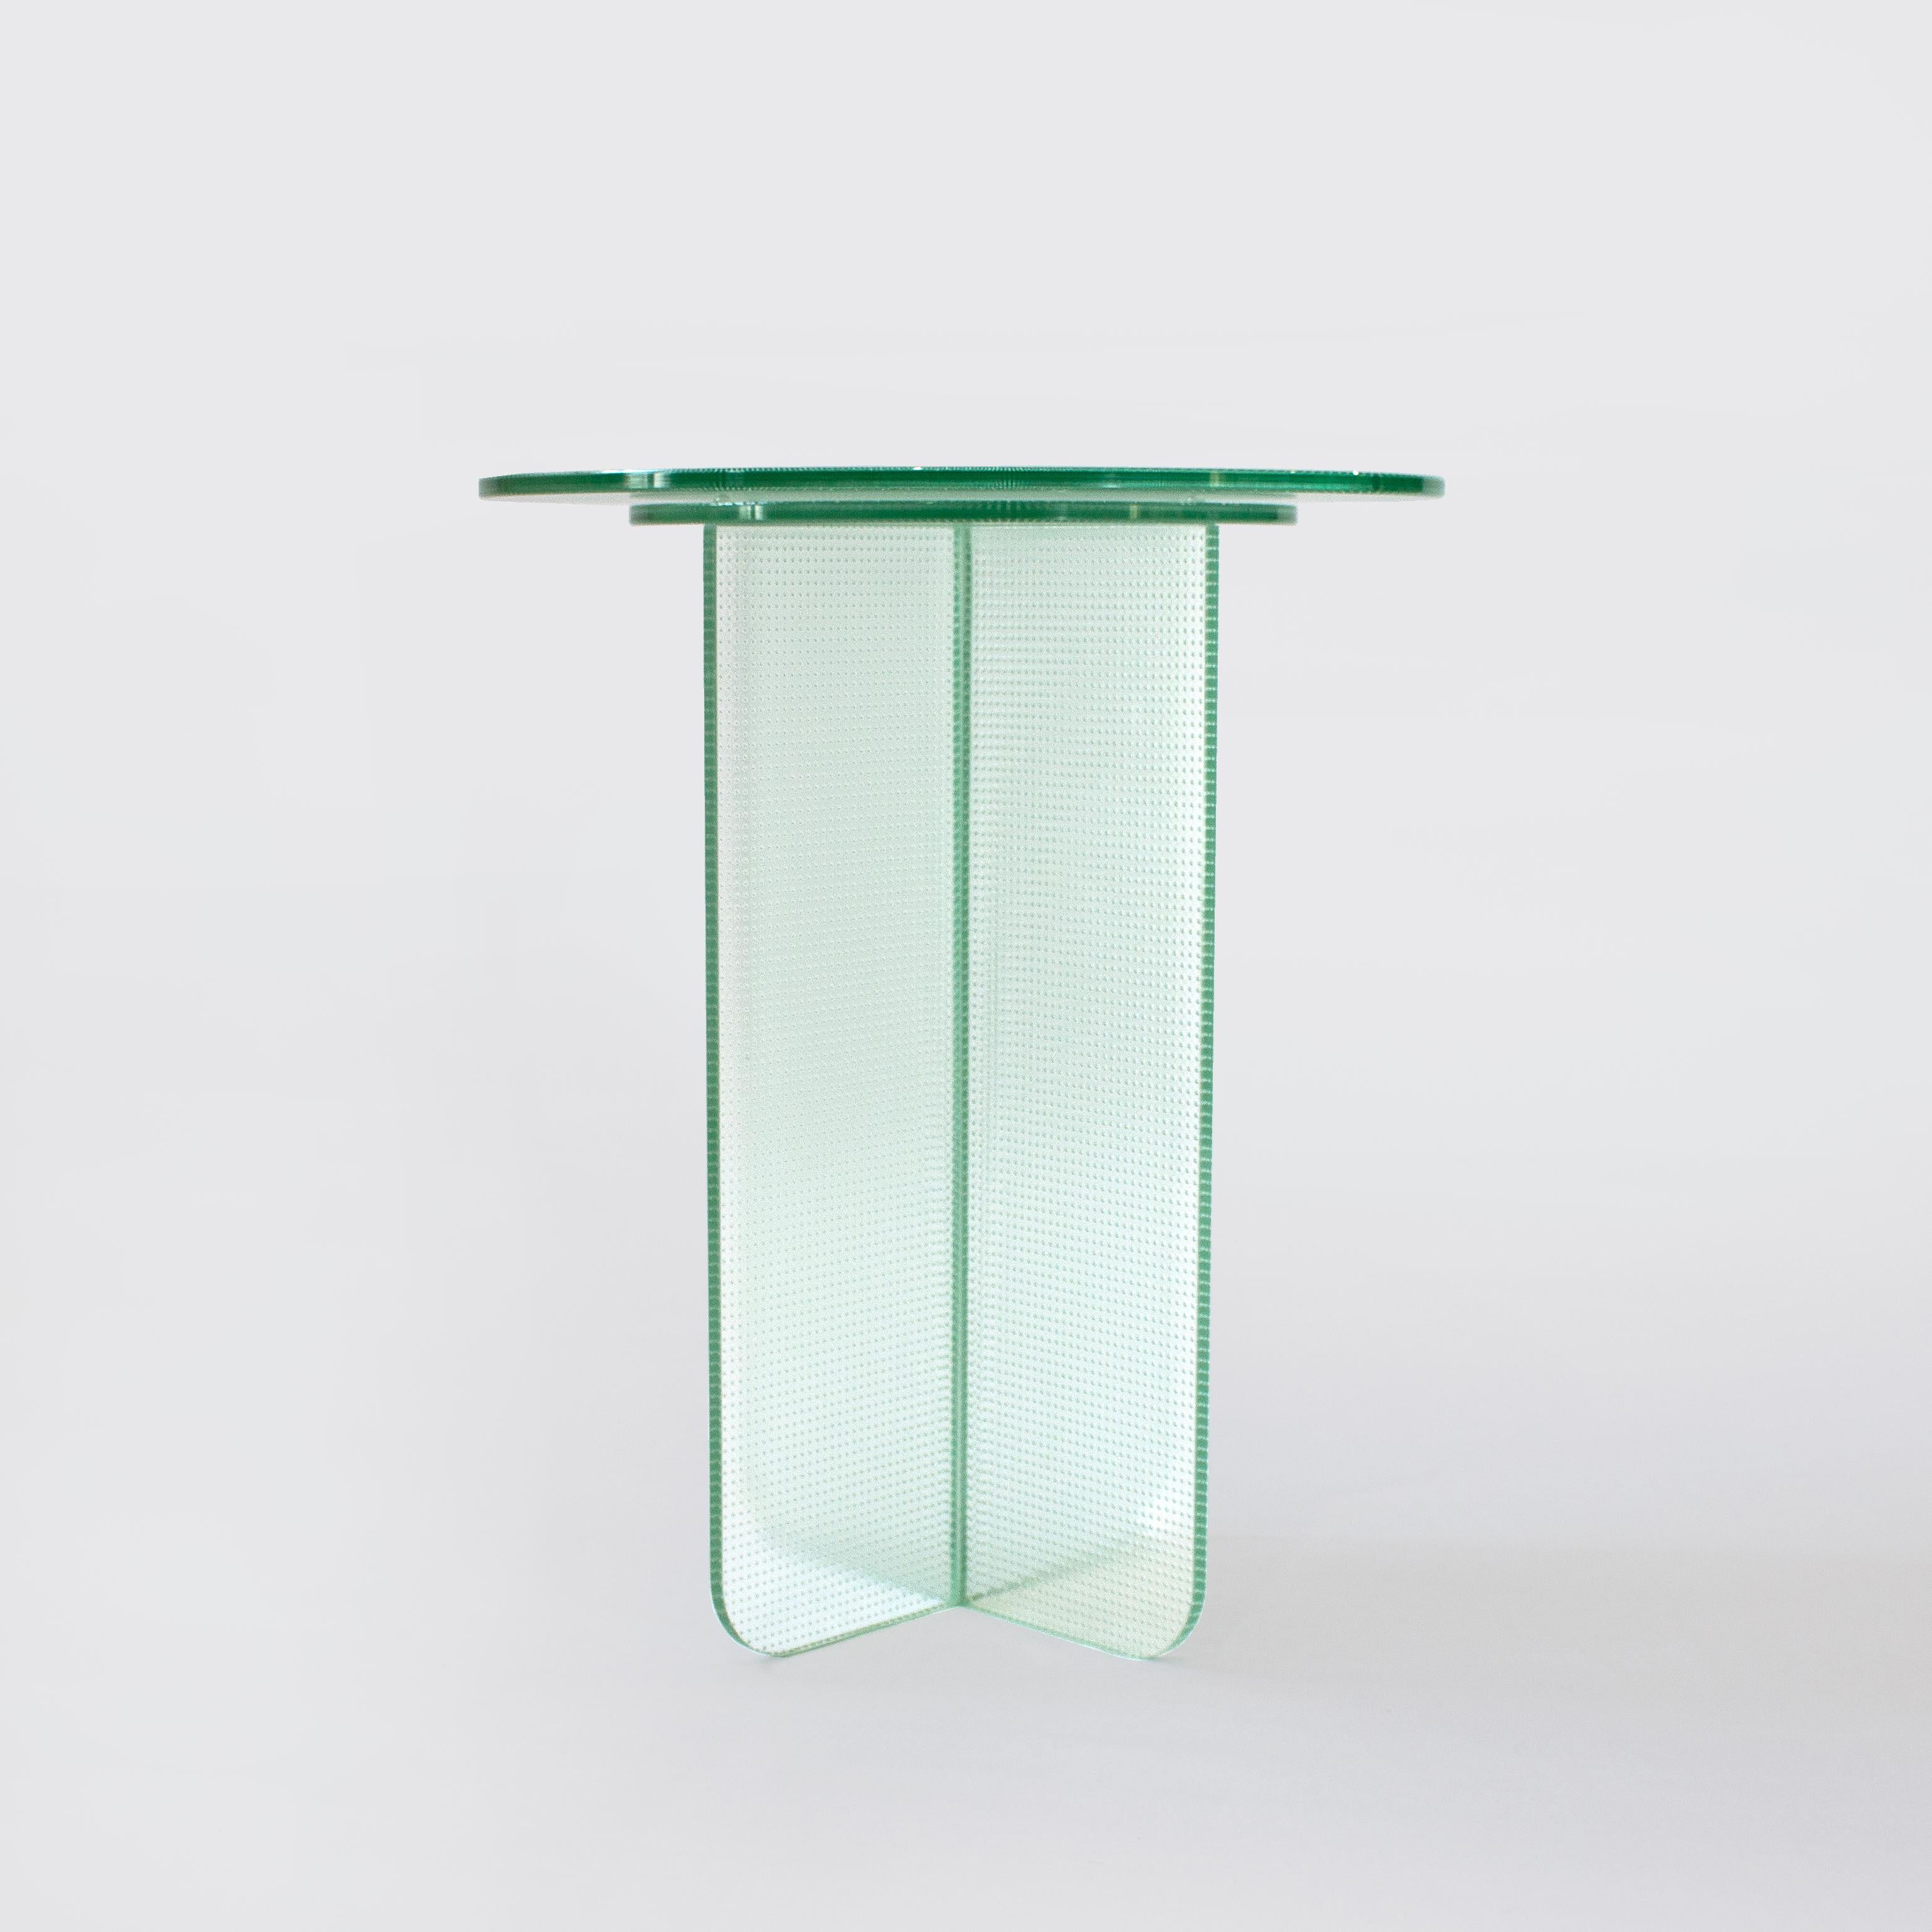 Float collection explores transparent form with a subtle overlay of texture, transforming simple tables into light shape-shifting pieces. Made entirely of glass Float’s seamless form changes depending on it’s viewing angle, with material opacity,